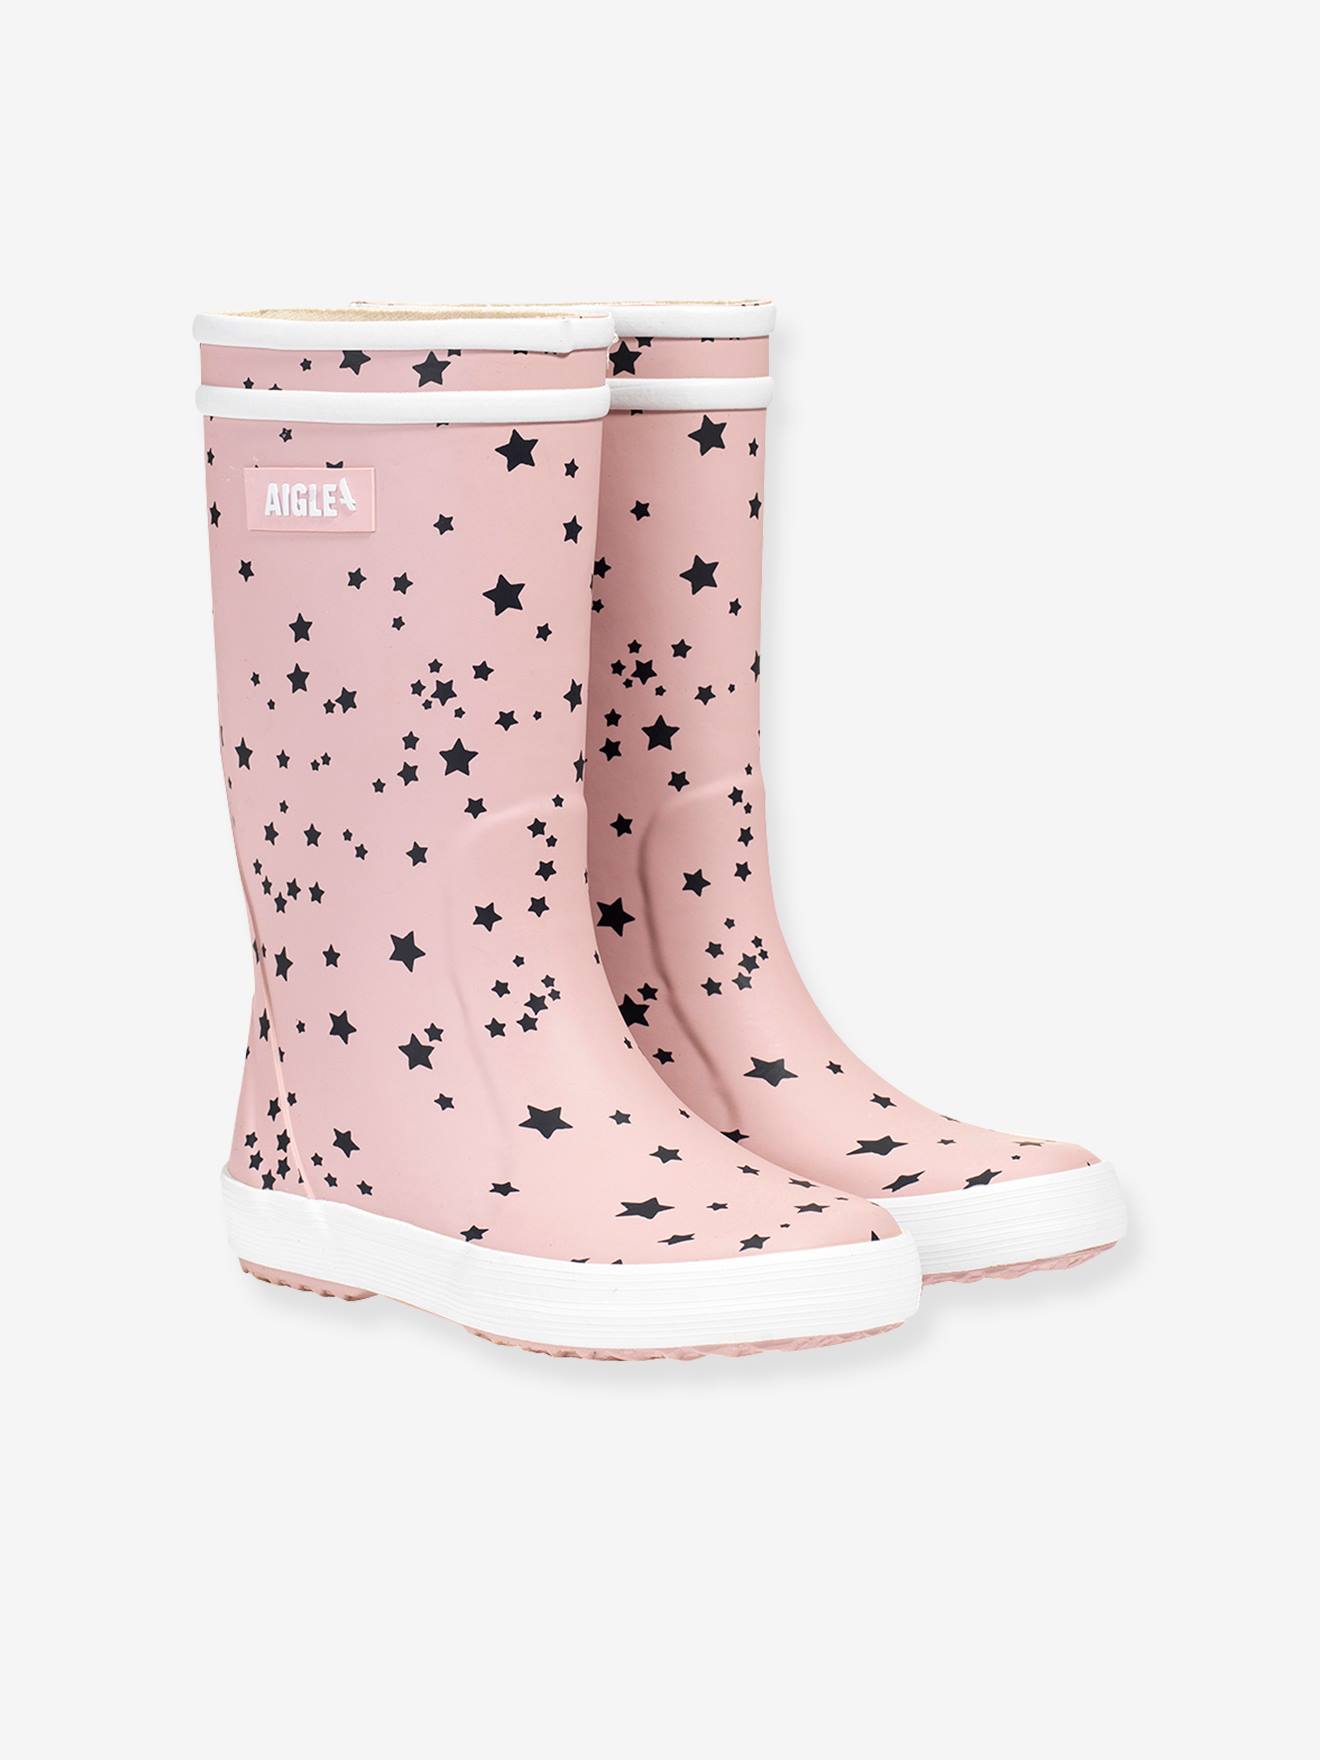 Wellies for Kids, Lolly Pop Play by AIGLE(r) rose